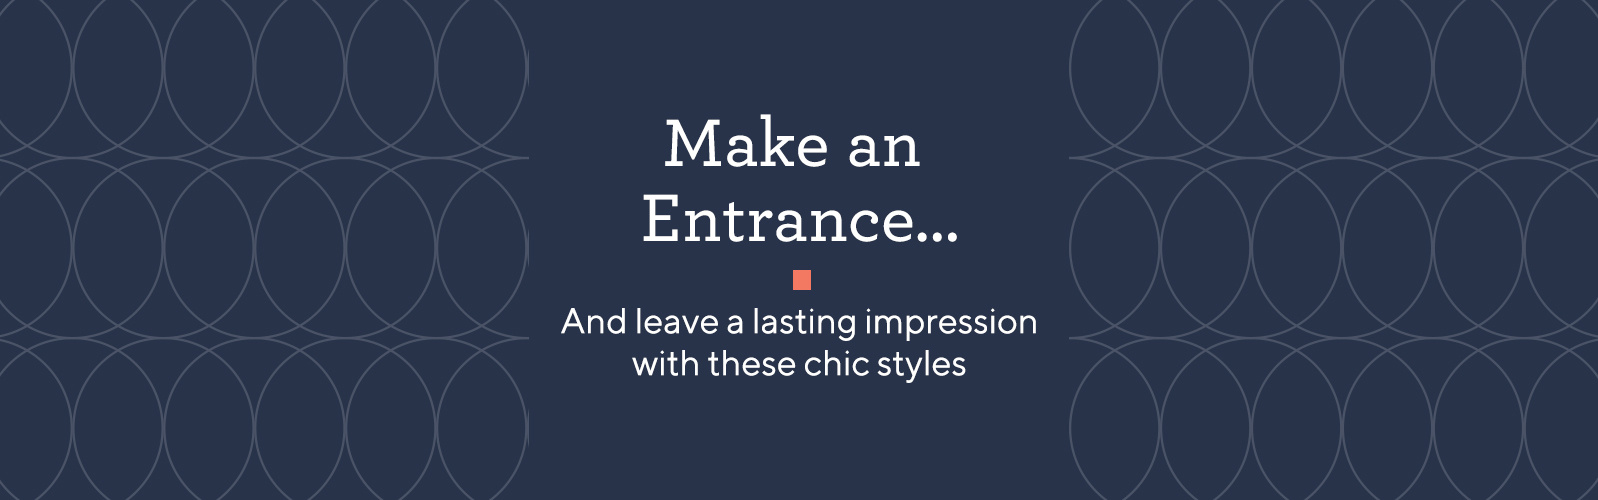 Make an Entrance…  And leave a lasting impression with these chic styles